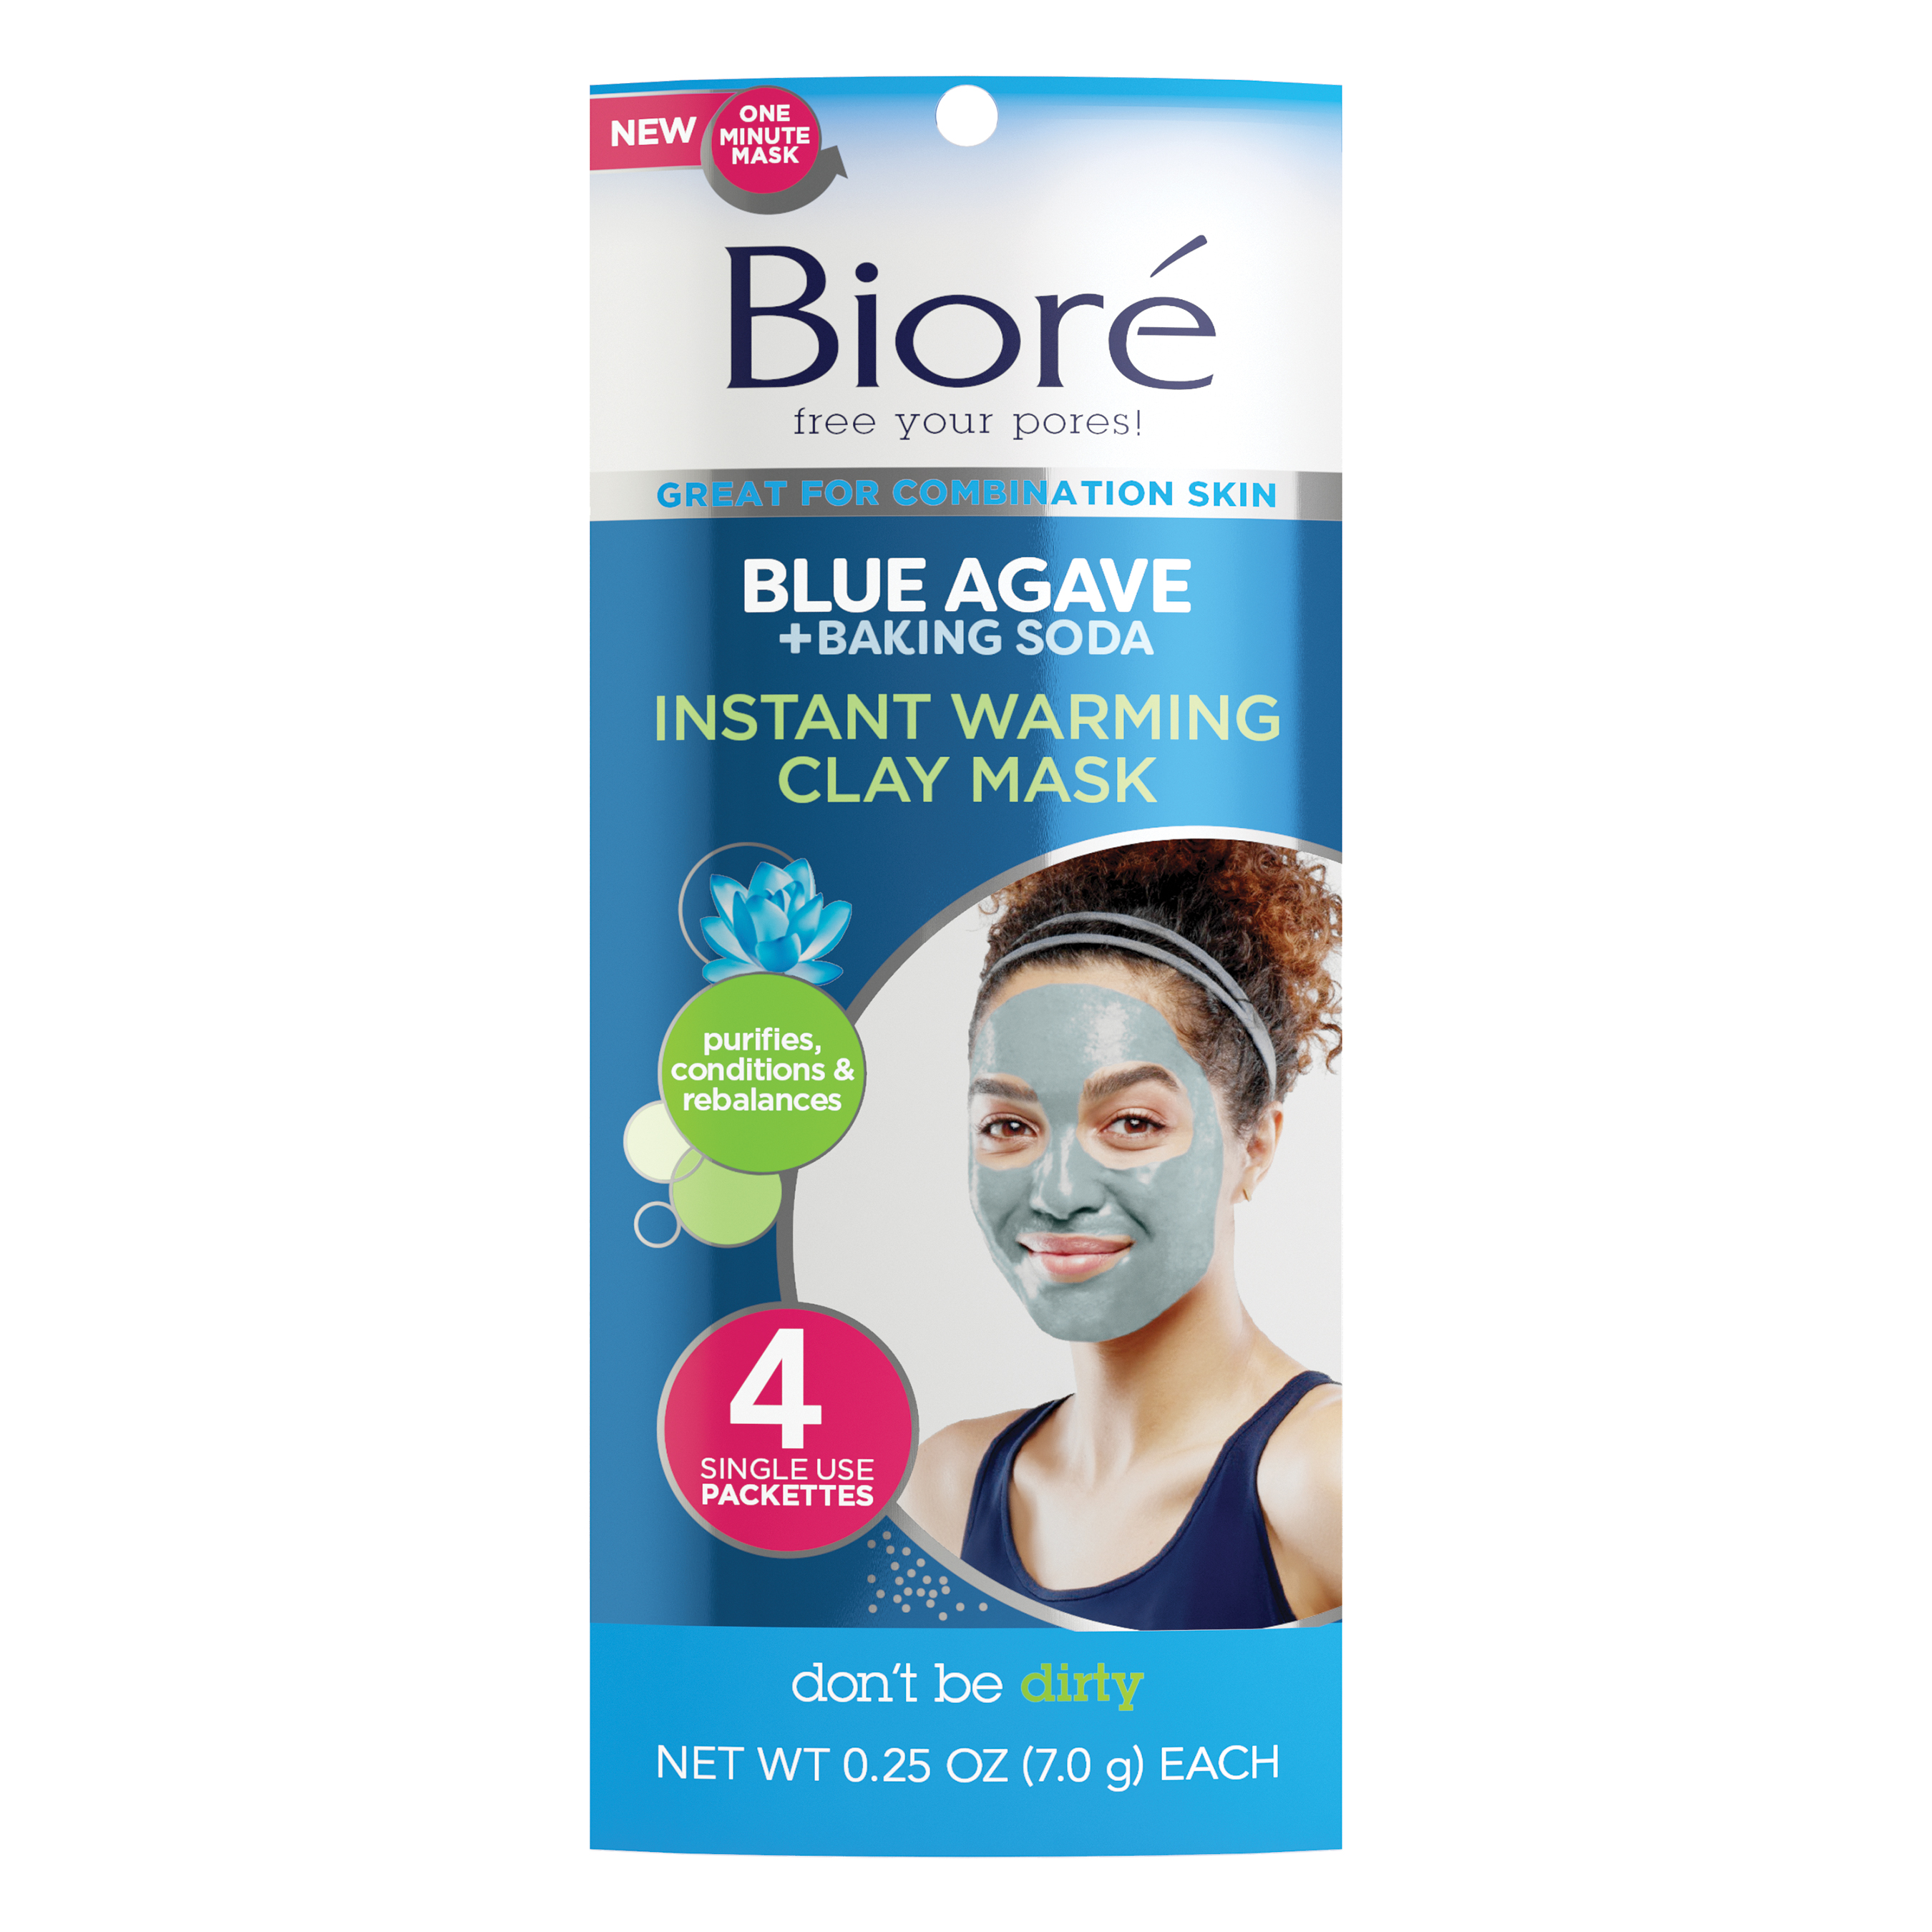 Biore(R) Blue Agave + Baking Soda Instant Warming Clay mask